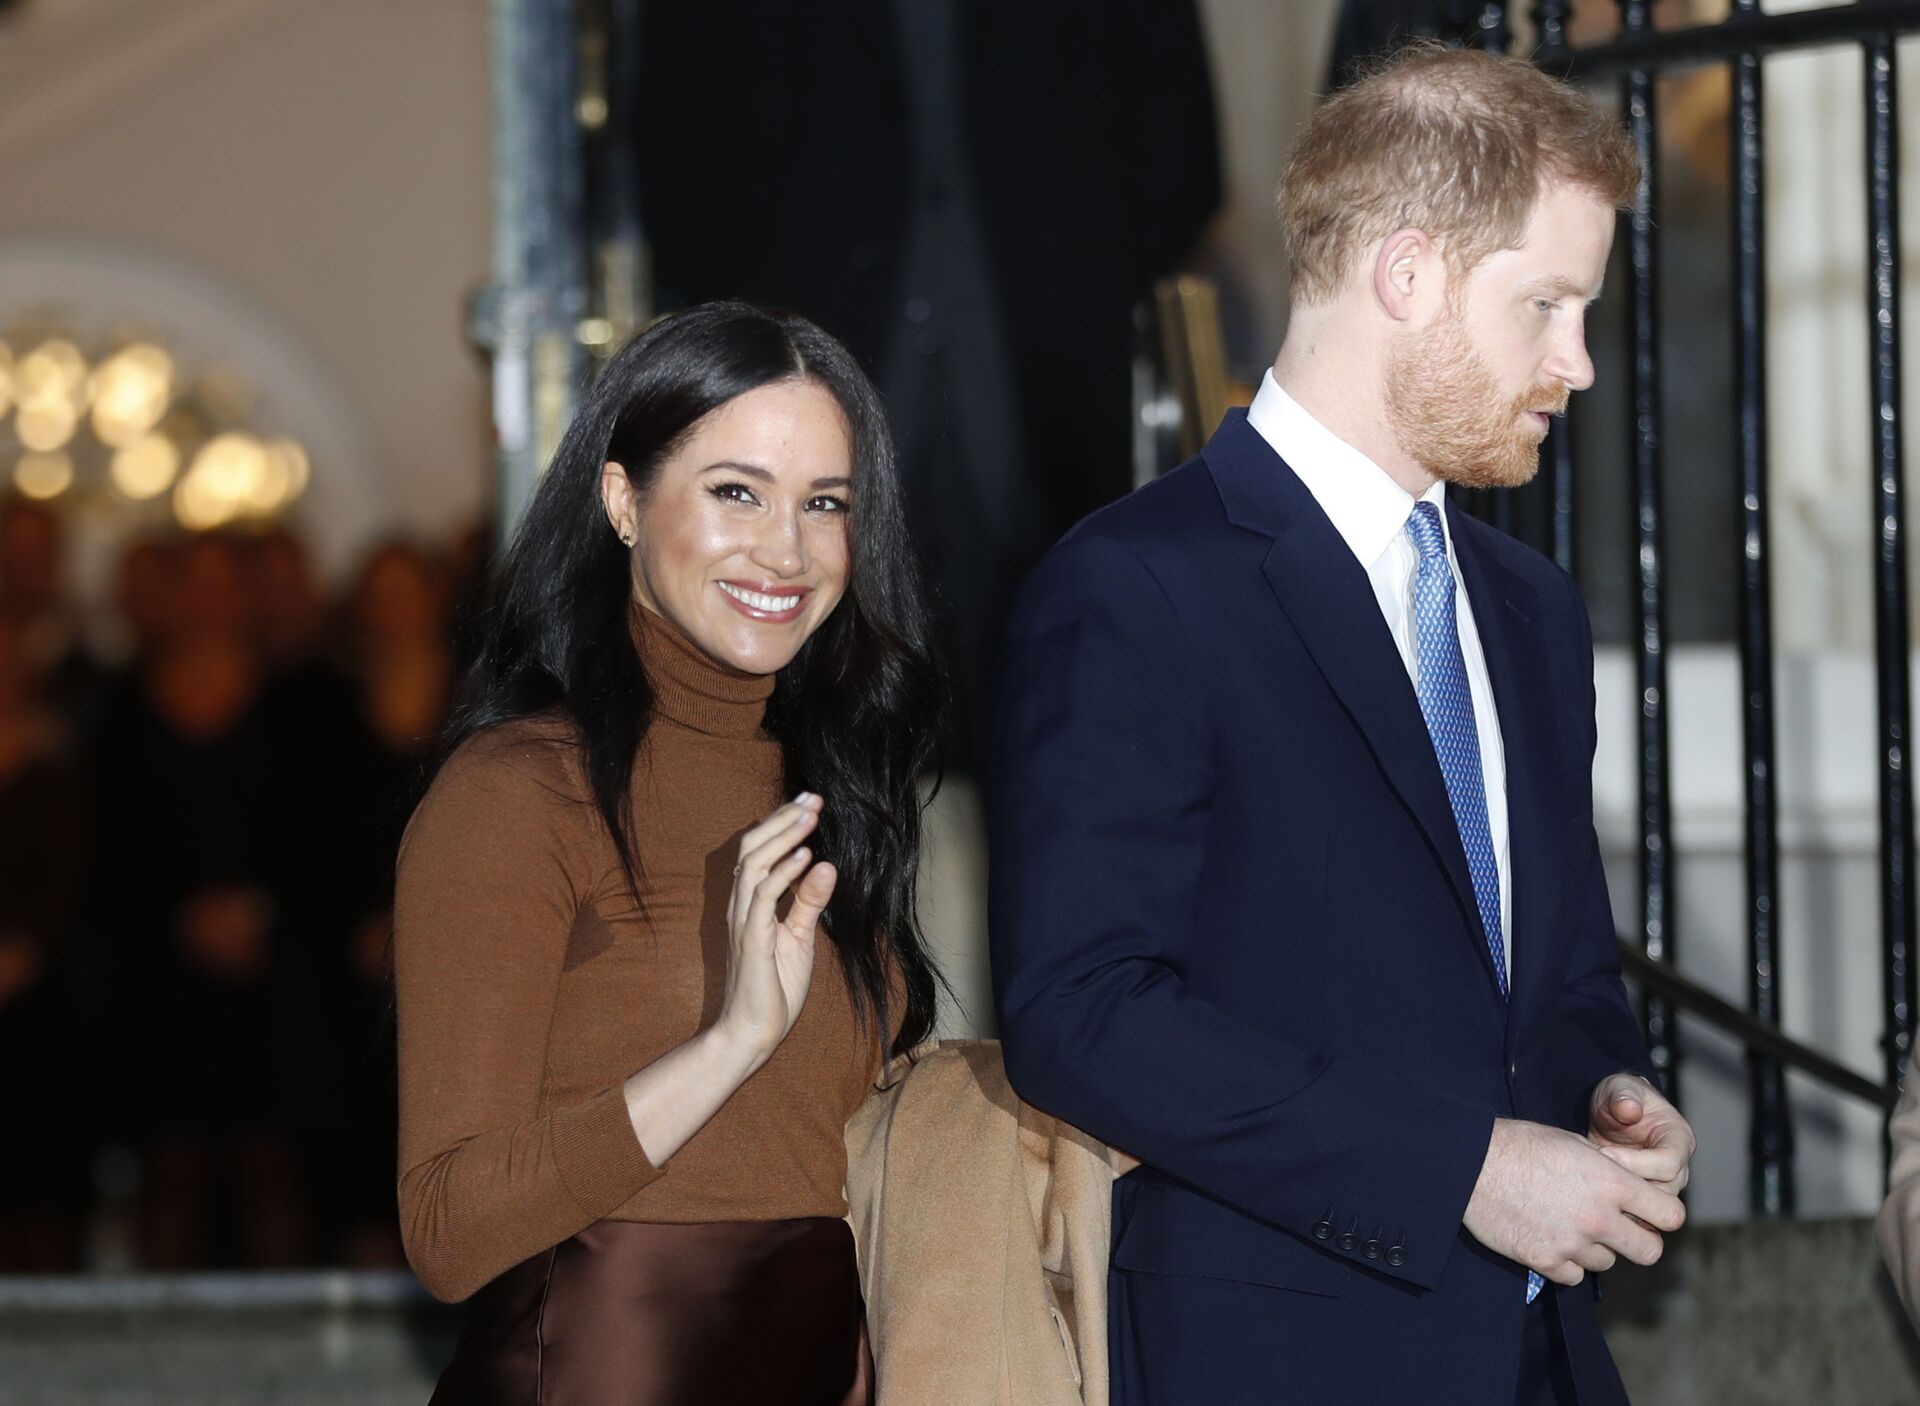 In this Jan. 7, 2020, file photo, Britain's Prince Harry and Meghan, Duchess of Sussex leave after visiting Canada House in London, after their recent stay in Canada - Sputnik International, 1920, 19.12.2021